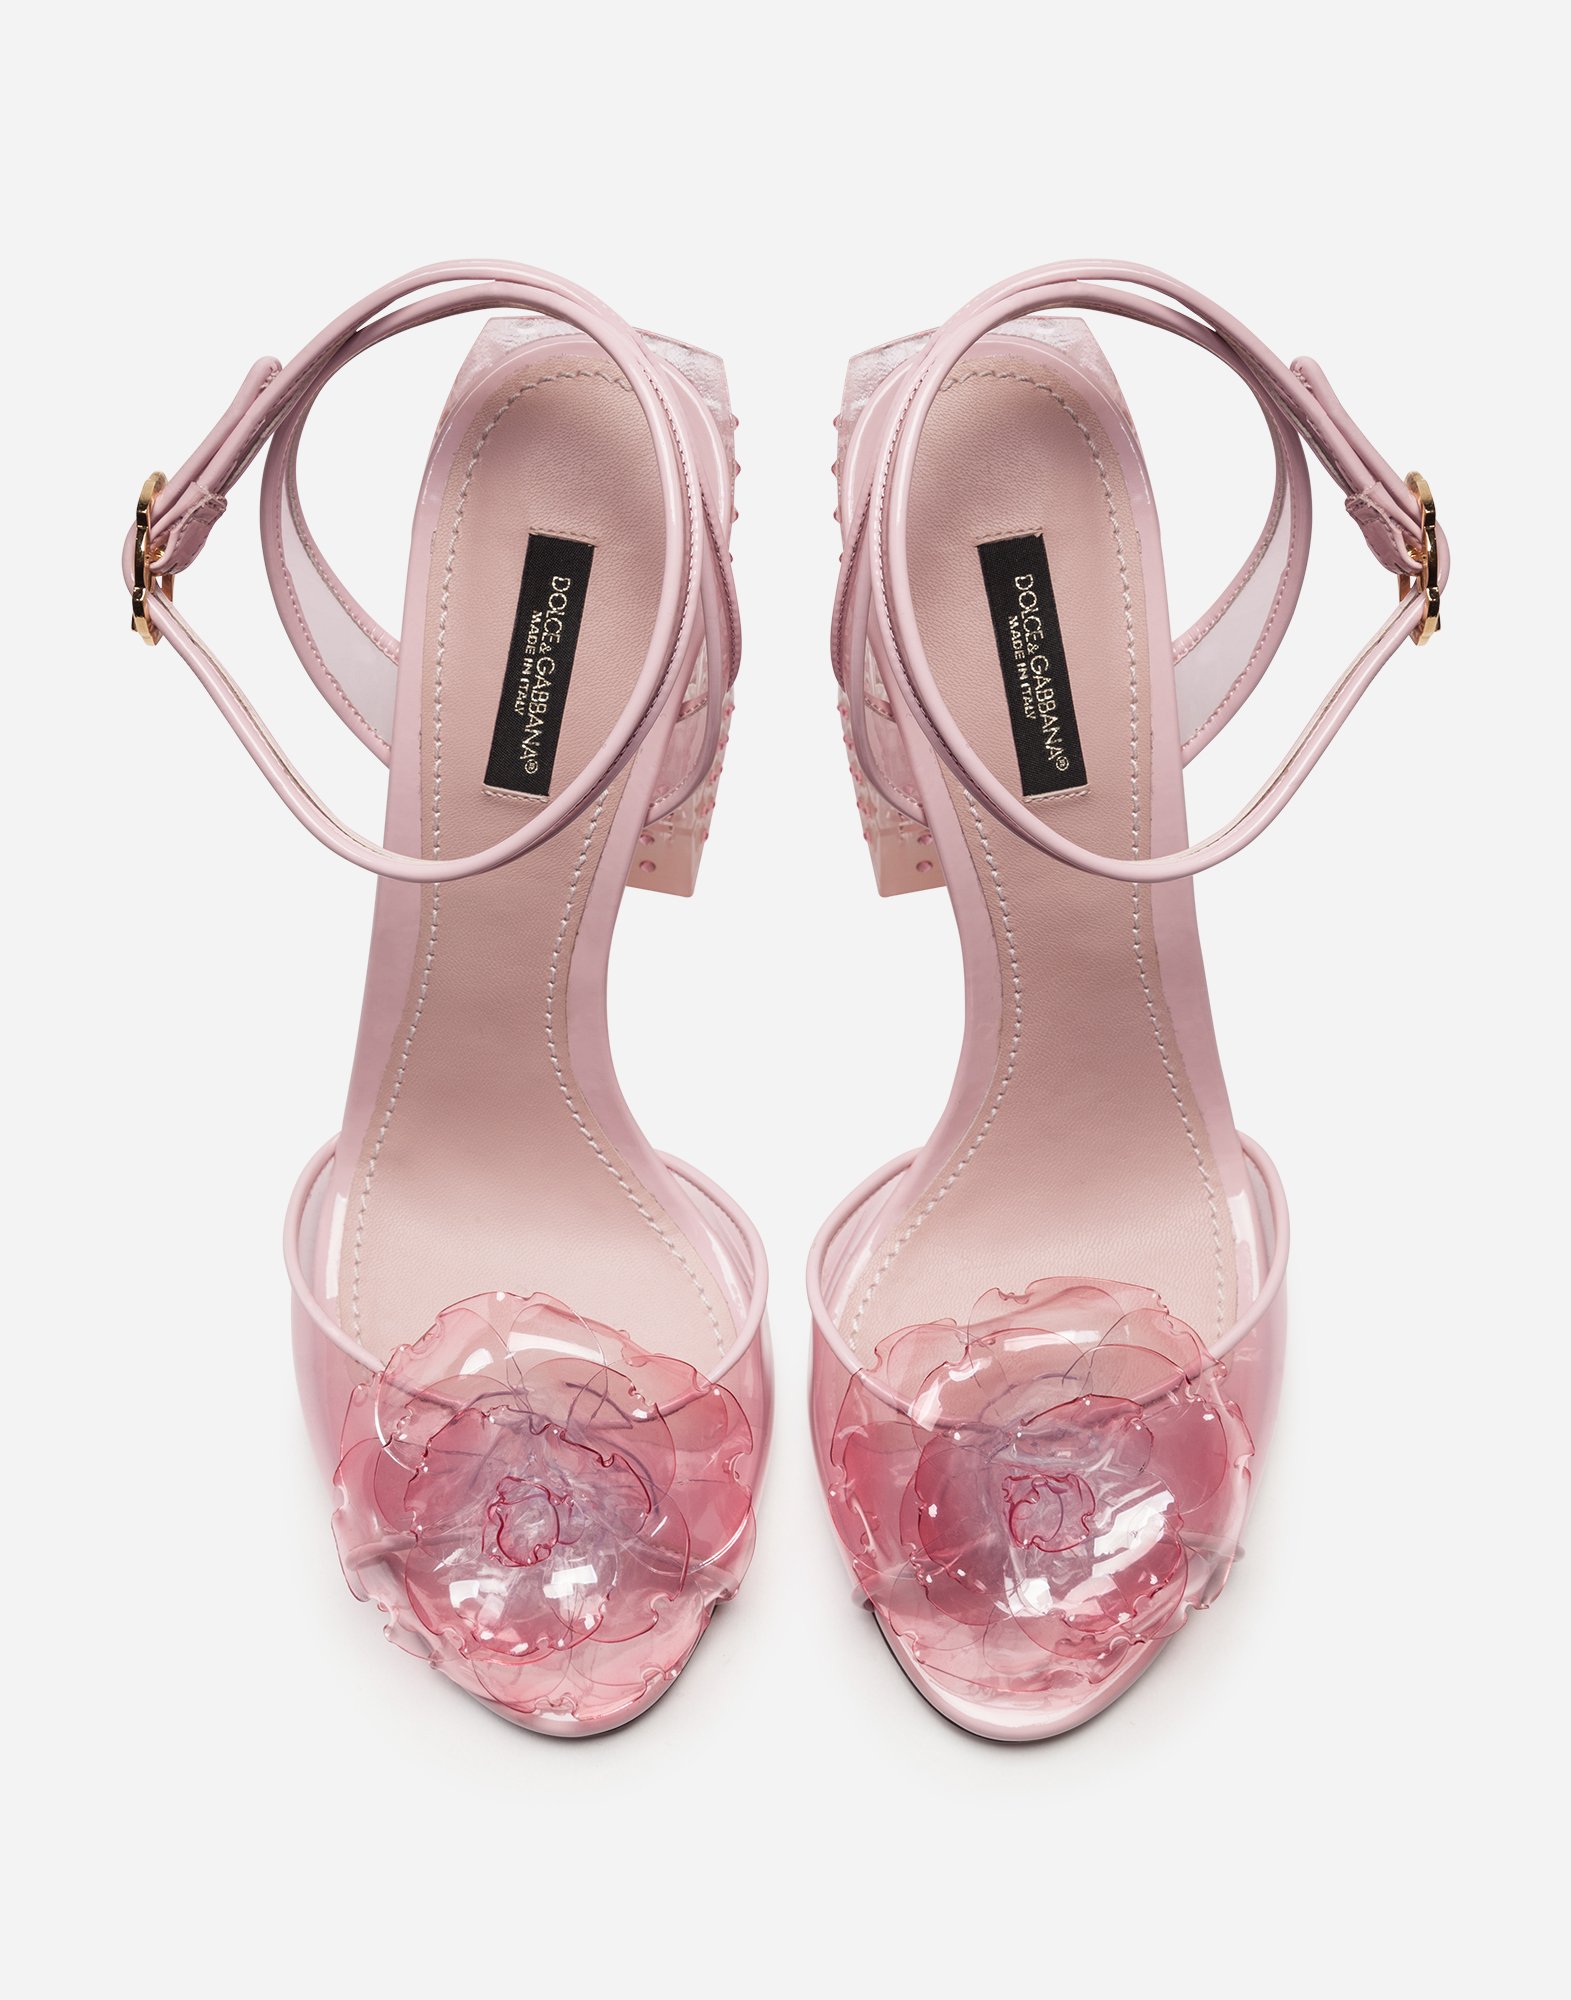 dolce and gabbana clear heels